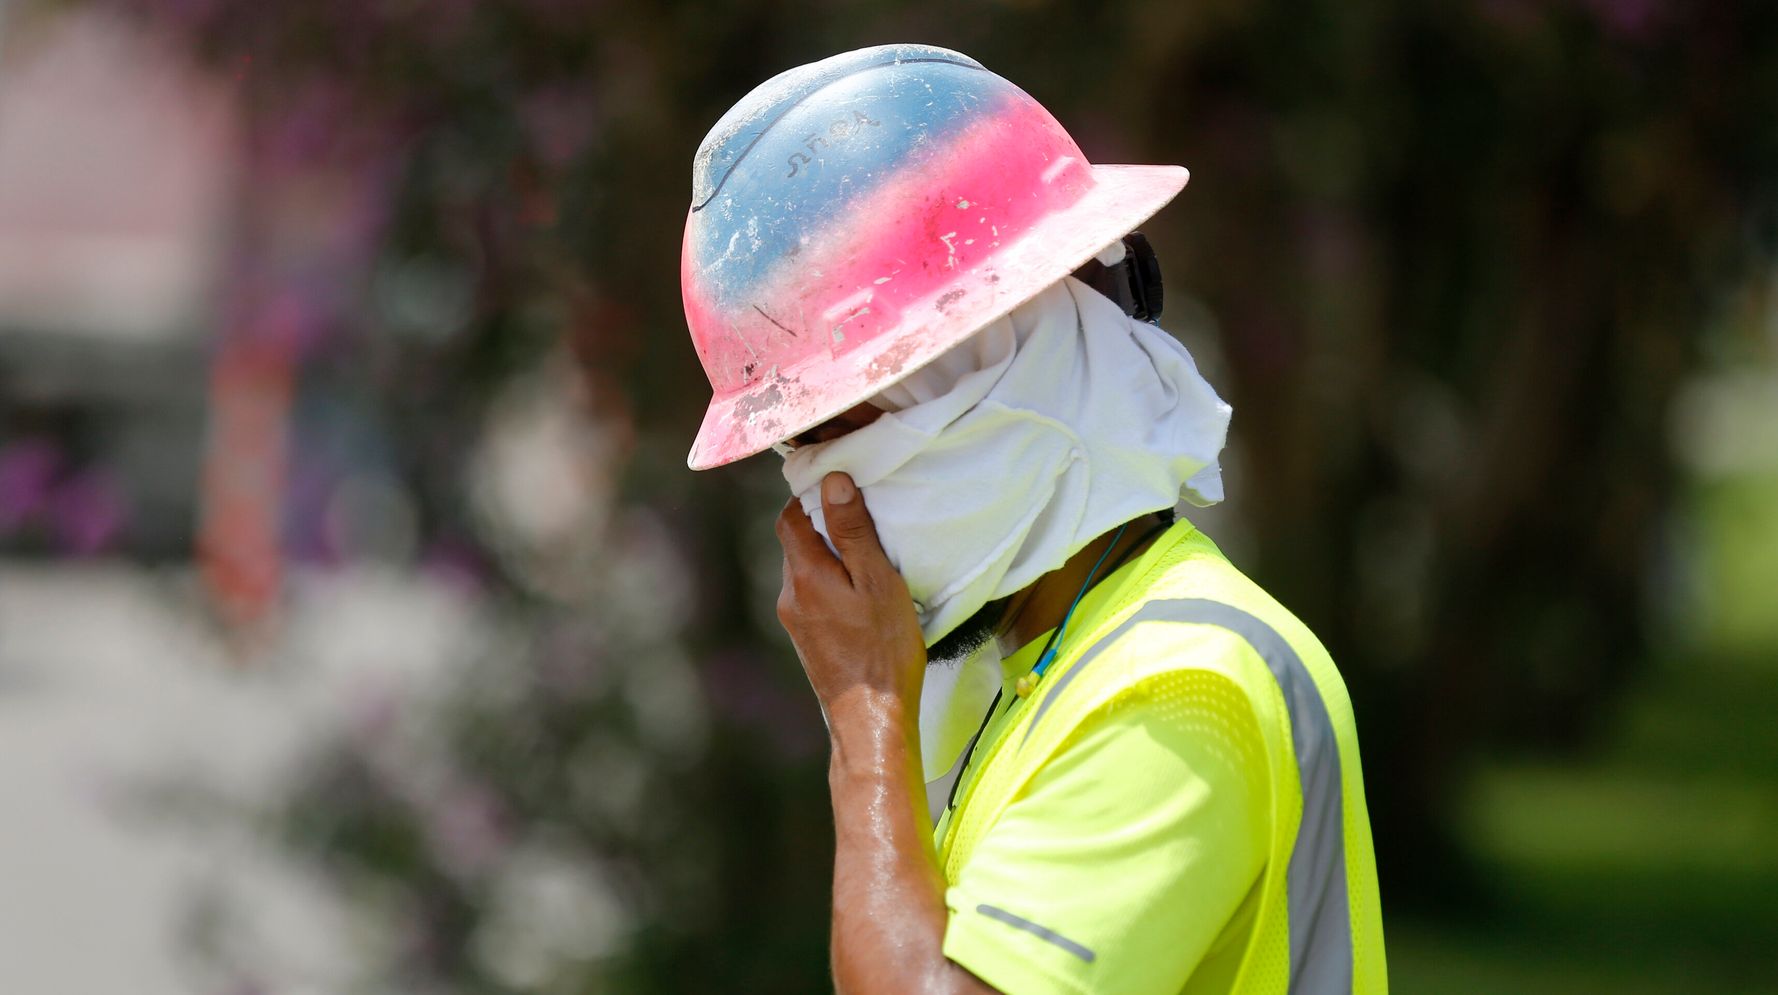 Biden Pursues New Regulation To Protect Workers From Extreme Heat